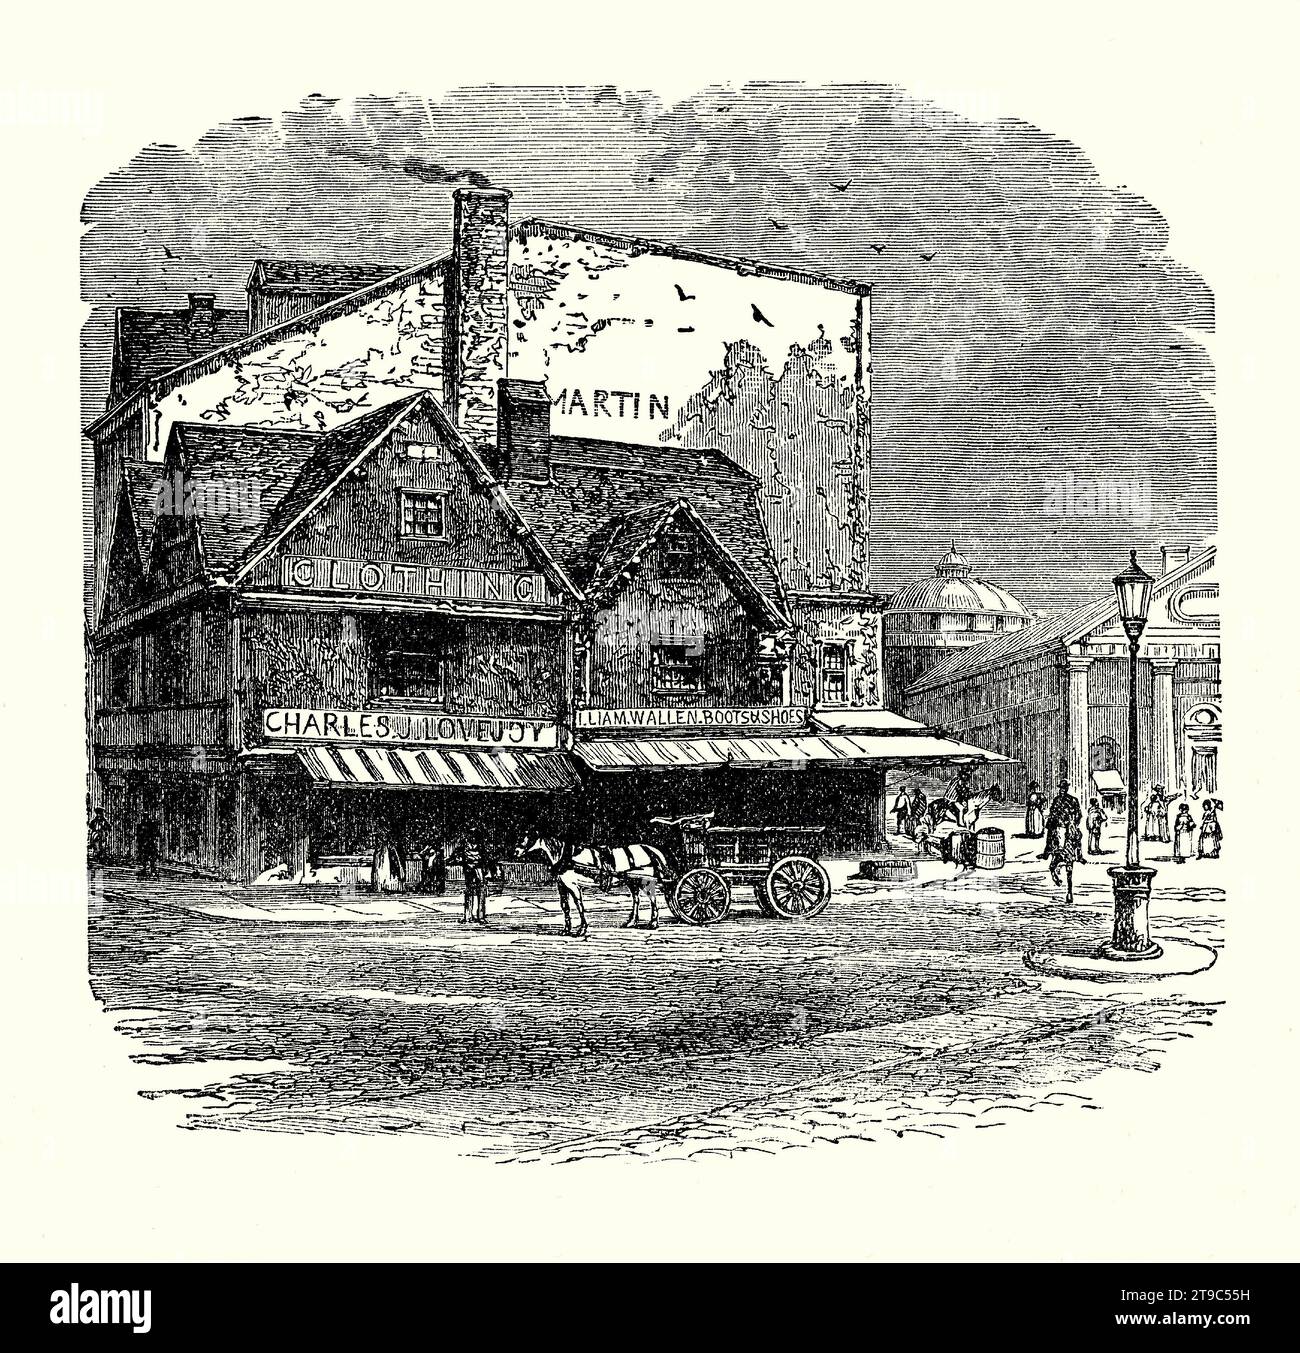 An old engraving the of the building where the plot for the Boston Tea Party was said to have been hatched at Dock Square, Boston, Massachusetts, USA in 1773. It is from an American history book of 1895. The Boston Tea Party was an American political and mercantile protest on December 16 1773, by the Sons of Liberty in Boston in colonial Massachusetts. The target was the Tea Act, which allowed the British East India Company to sell tea in the colonies without paying most taxes. The protesters destroyed an entire shipment of tea, boarding the ships and throwing the tea chests into Boston Harbor Stock Photo